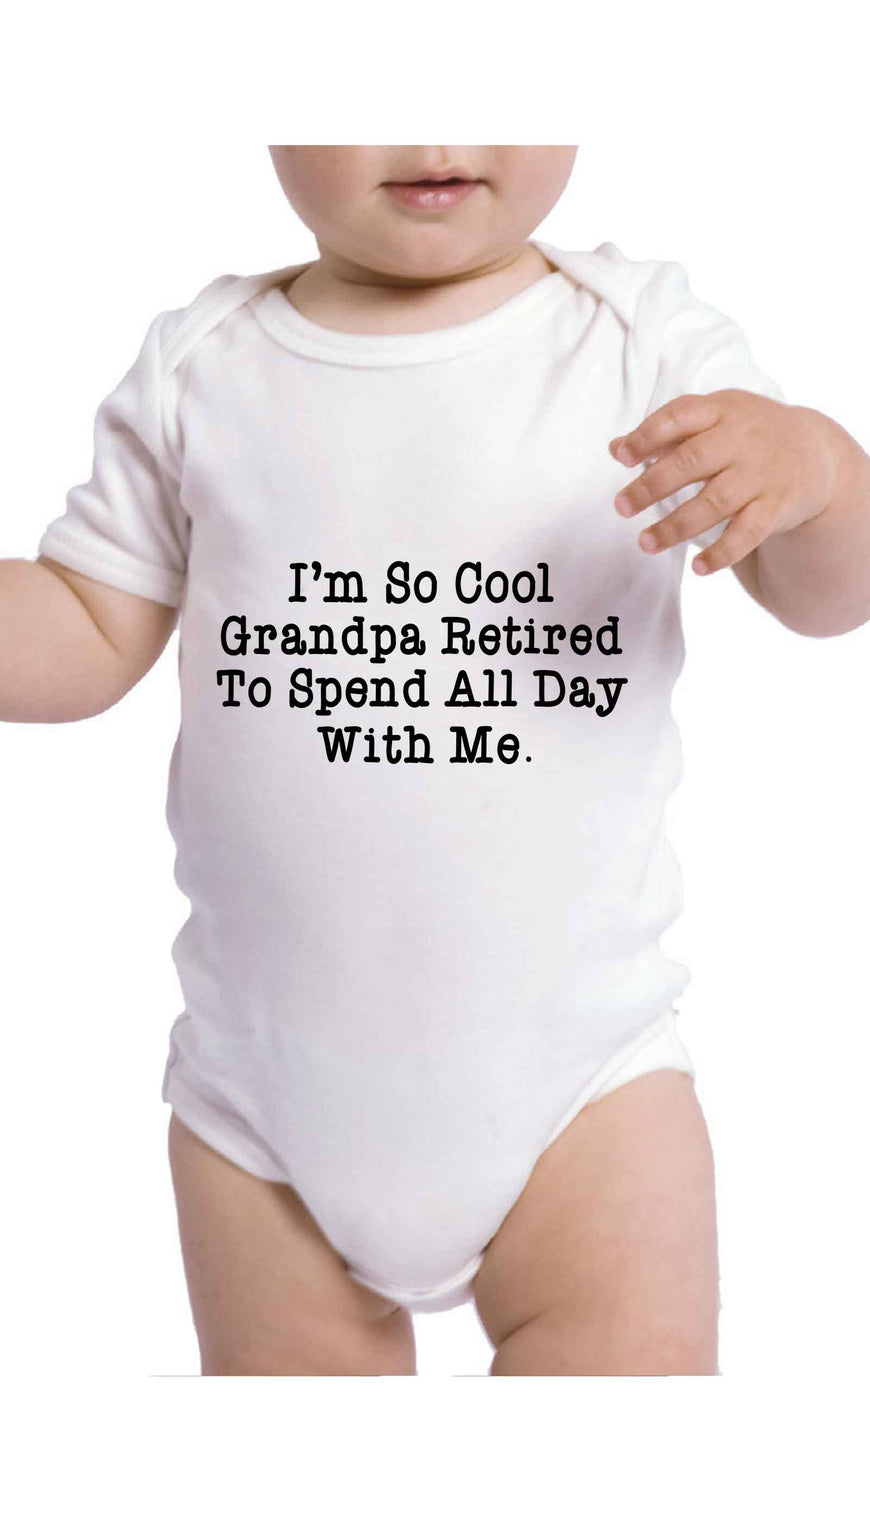 I'm So Cool Grandpa Retired To Spend All Day With ME Funny & Clever Baby Infant Onesie Gift | Sarcastic ME